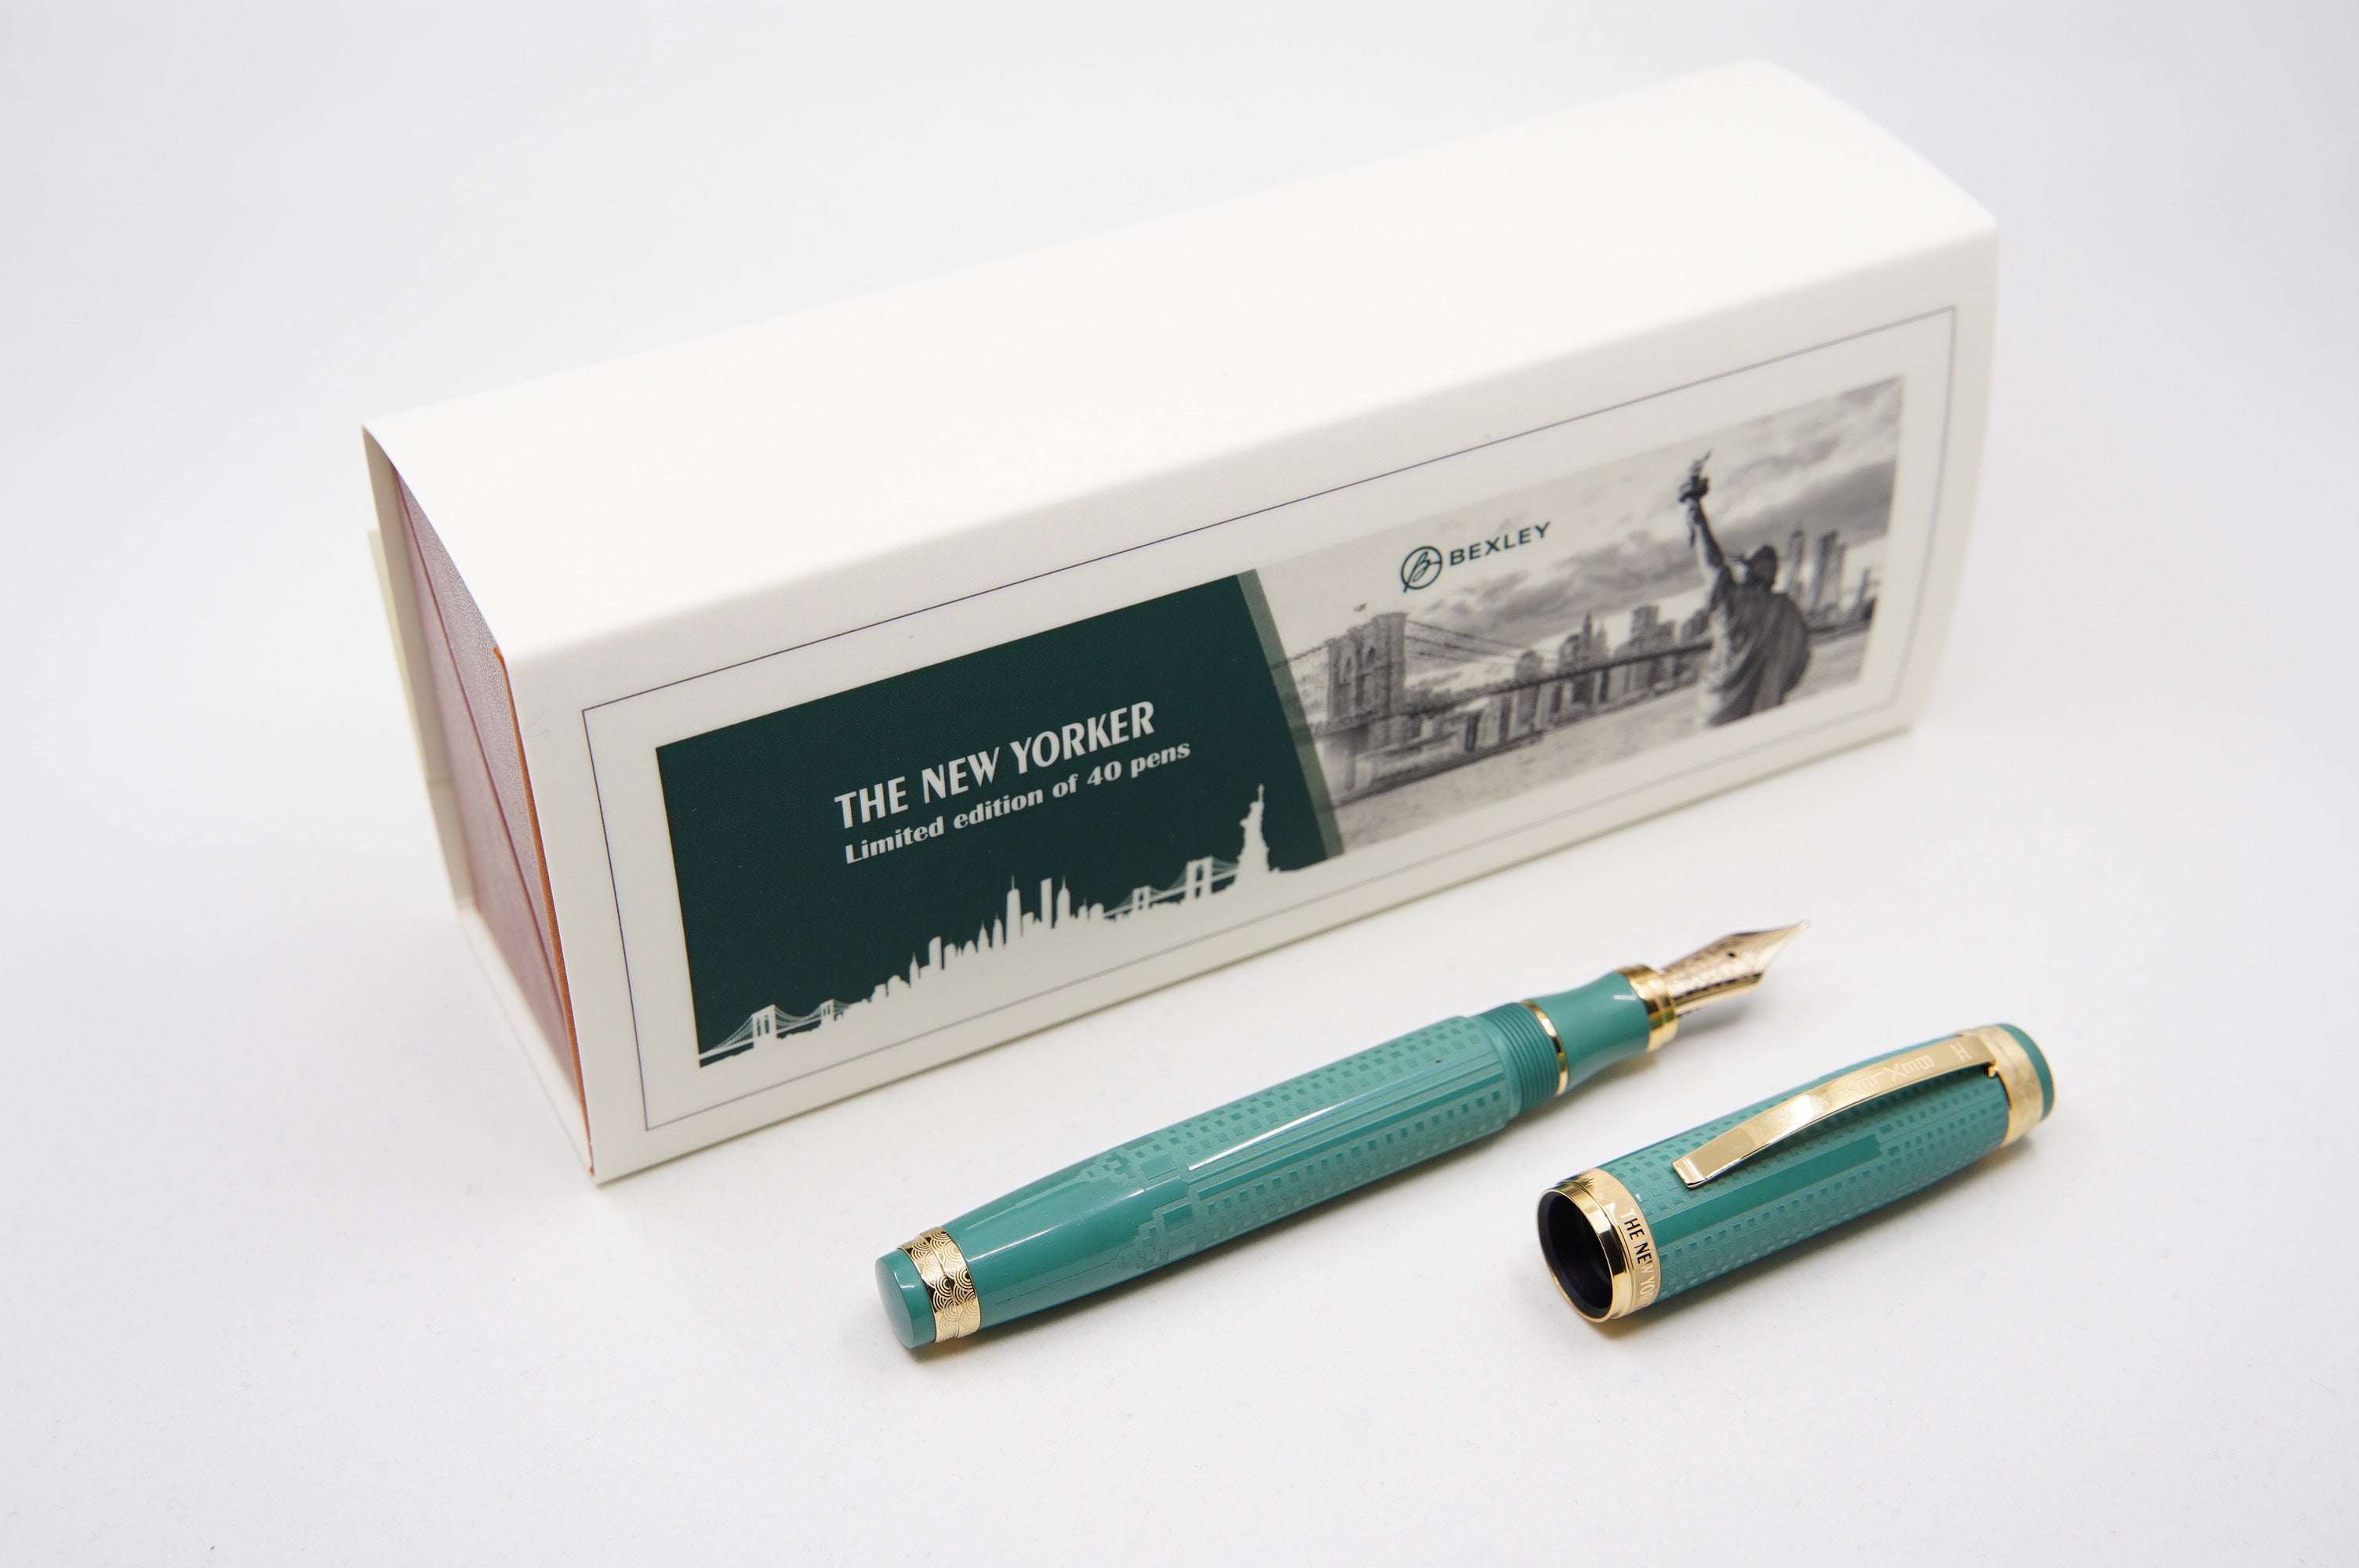 Bexley New Yorker Empire State Building Chased - Green Ebonite